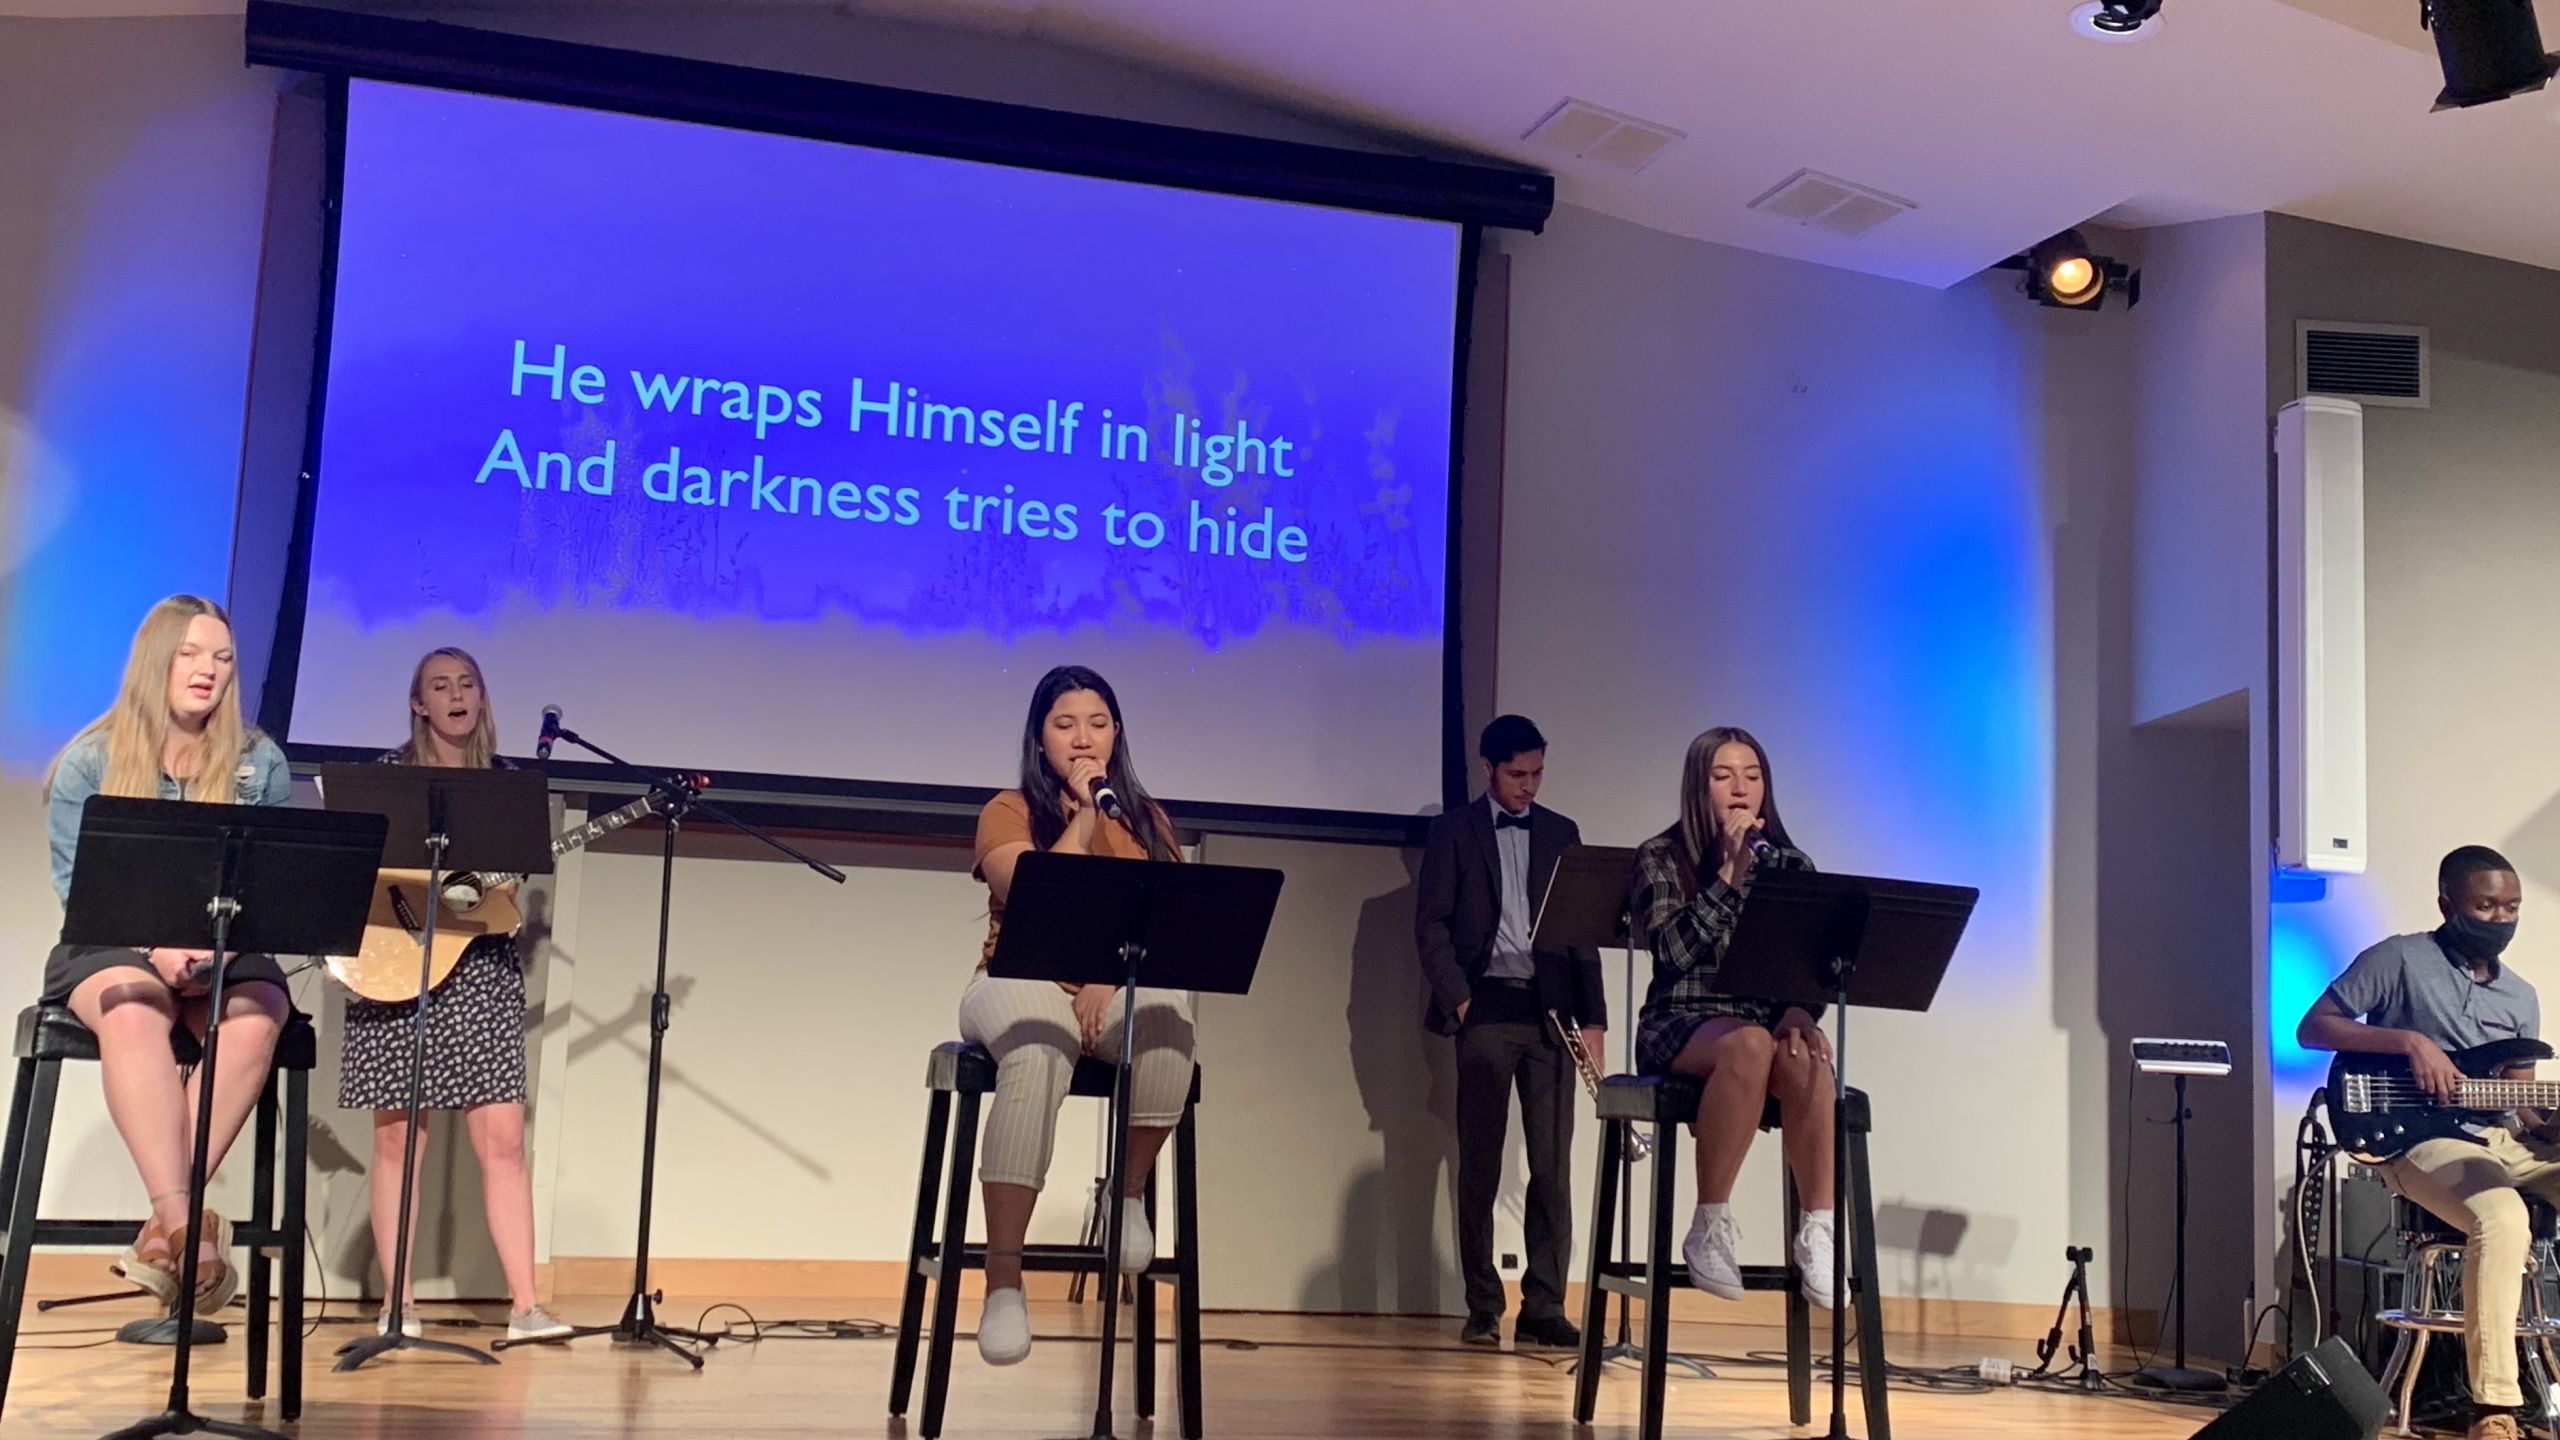 STUDENTS JOIN LITTLETON CHURCH FOR JOINT WORSHIP AND BAPTISM